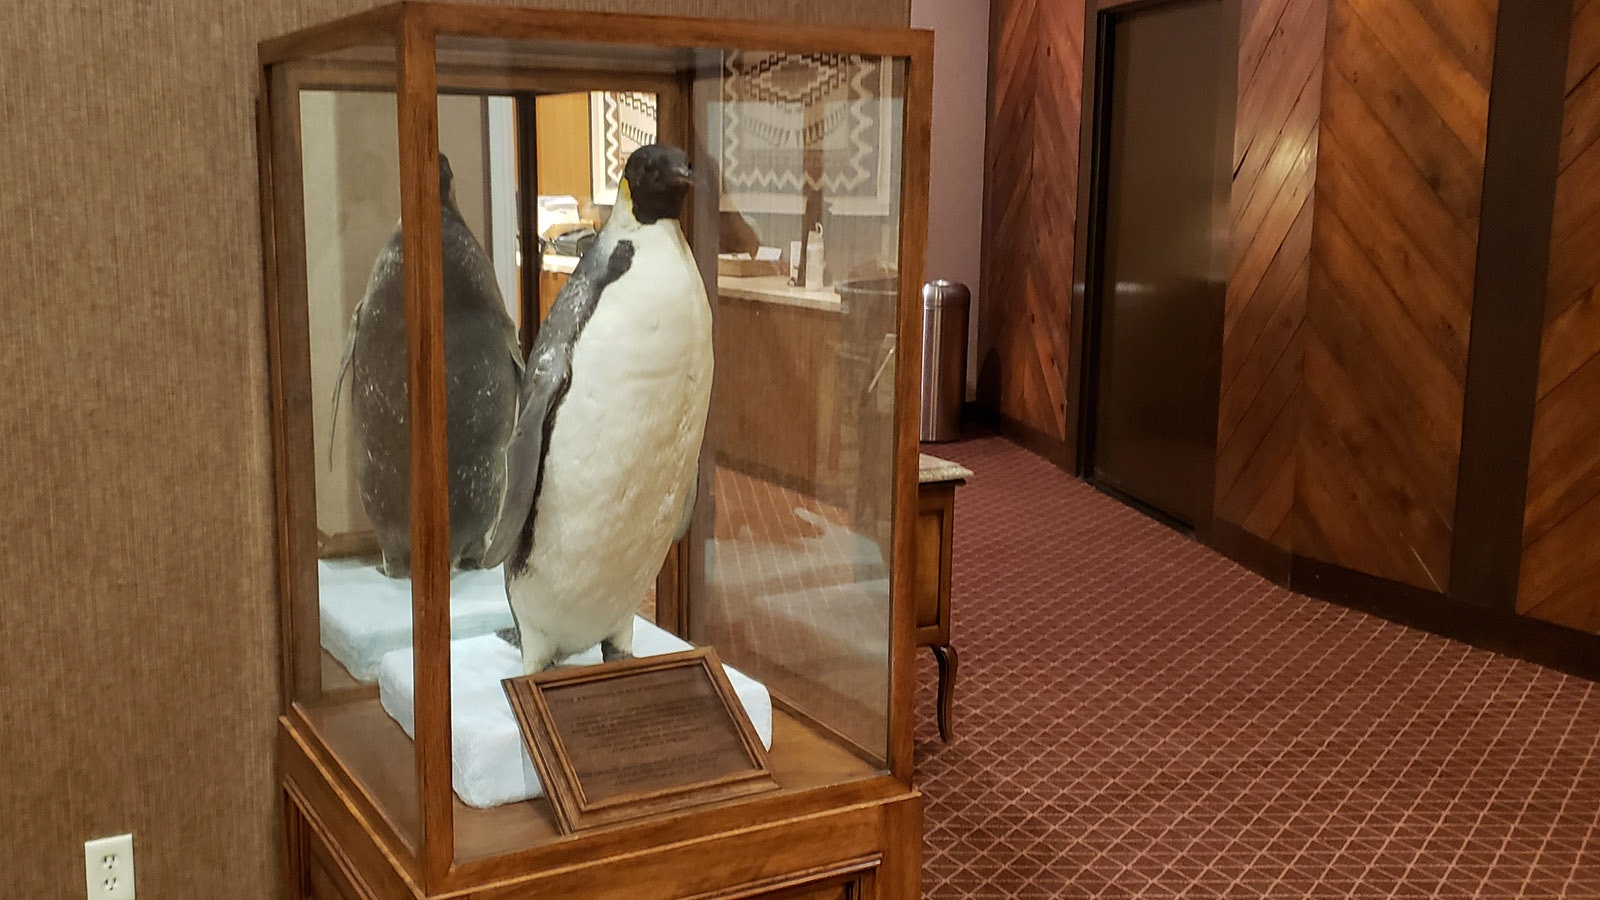 One of two penguins gifted to Little America by Admiral Byrd. The other is kept at the Cheyenne Little America.